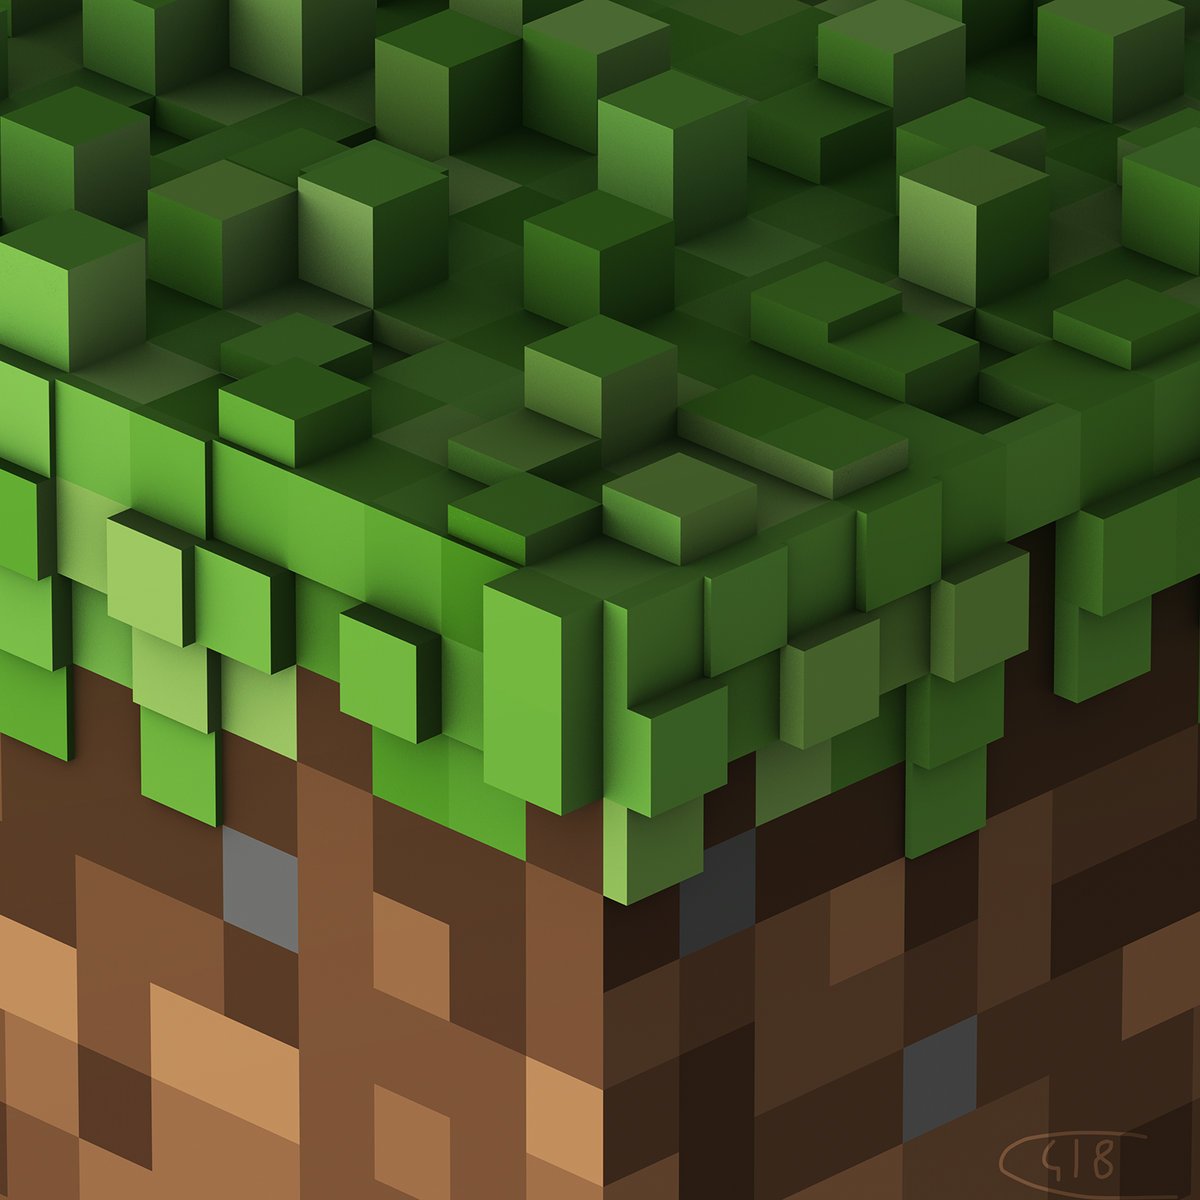 C418 Background Music Only